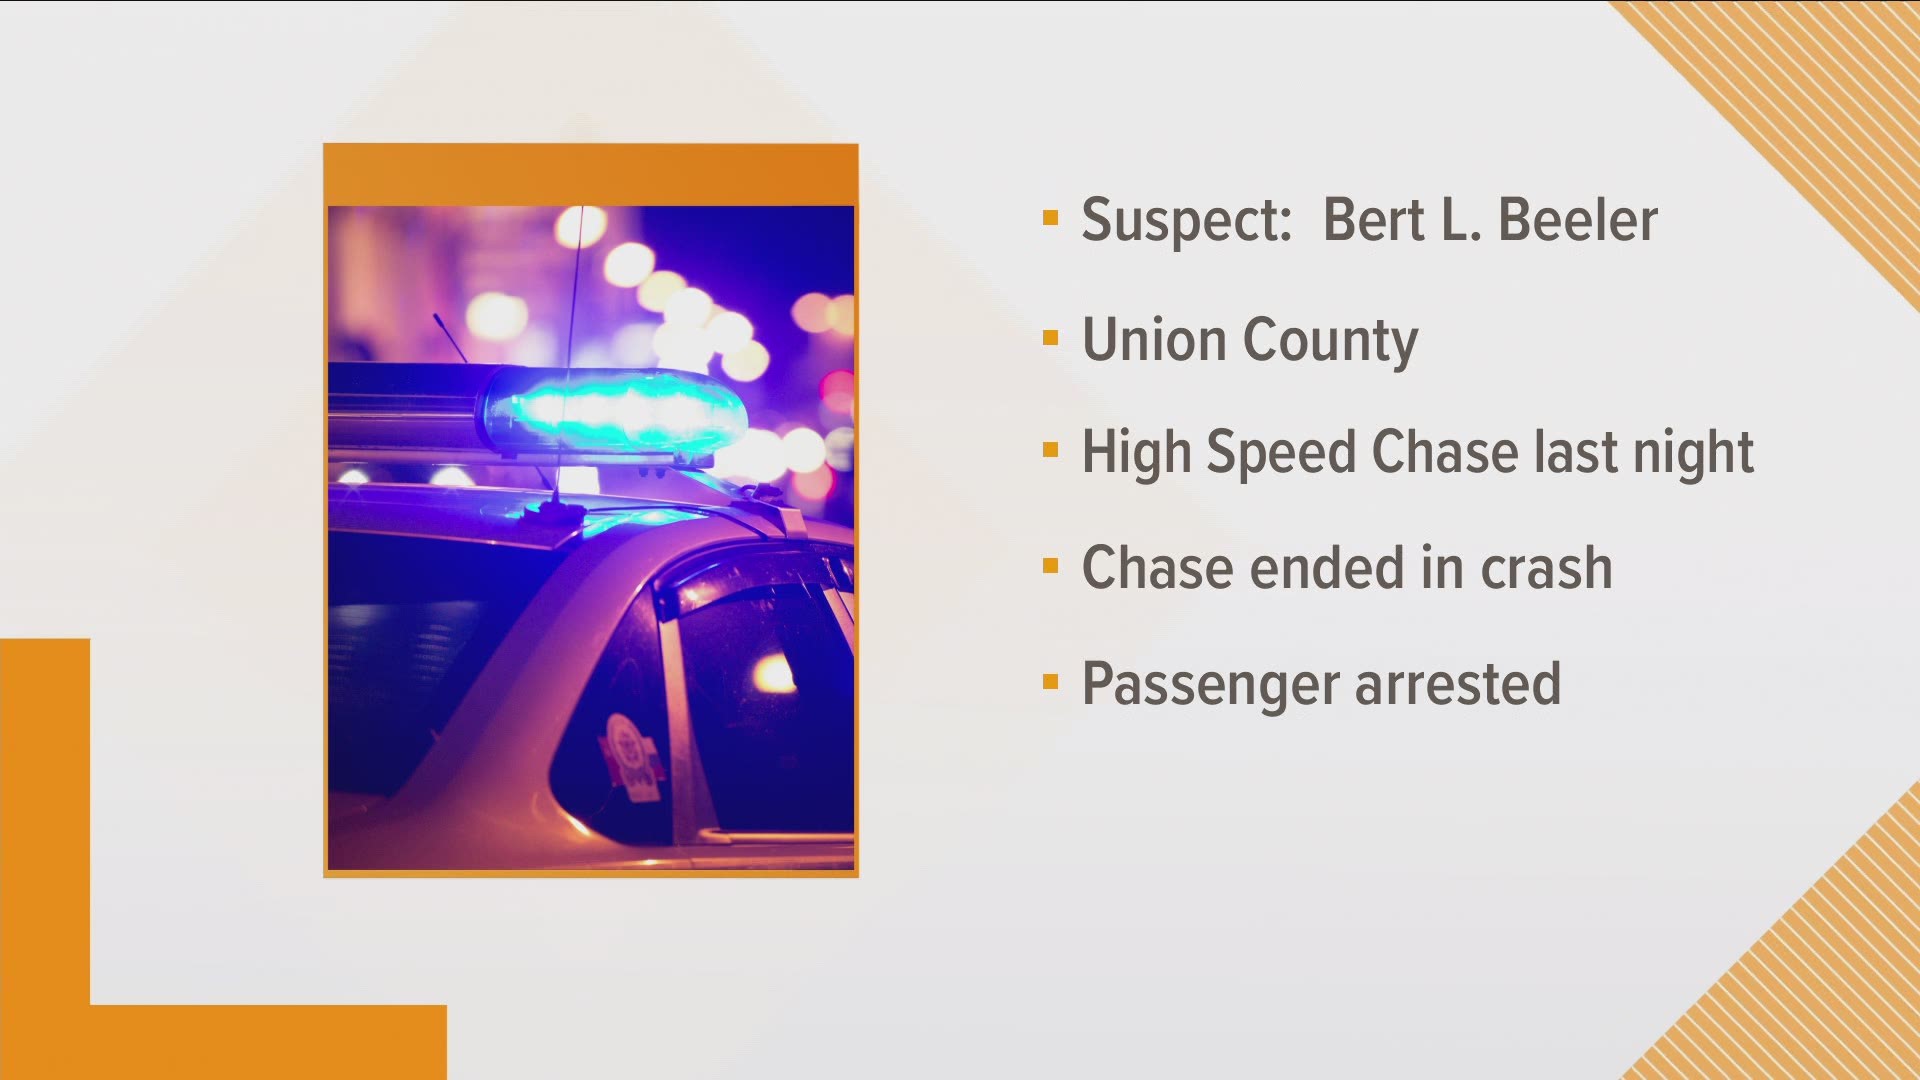 The driver, identified as Bert L. Beeler, 56, of Union County, continued driving recklessly, and go into oncoming traffic, police said.